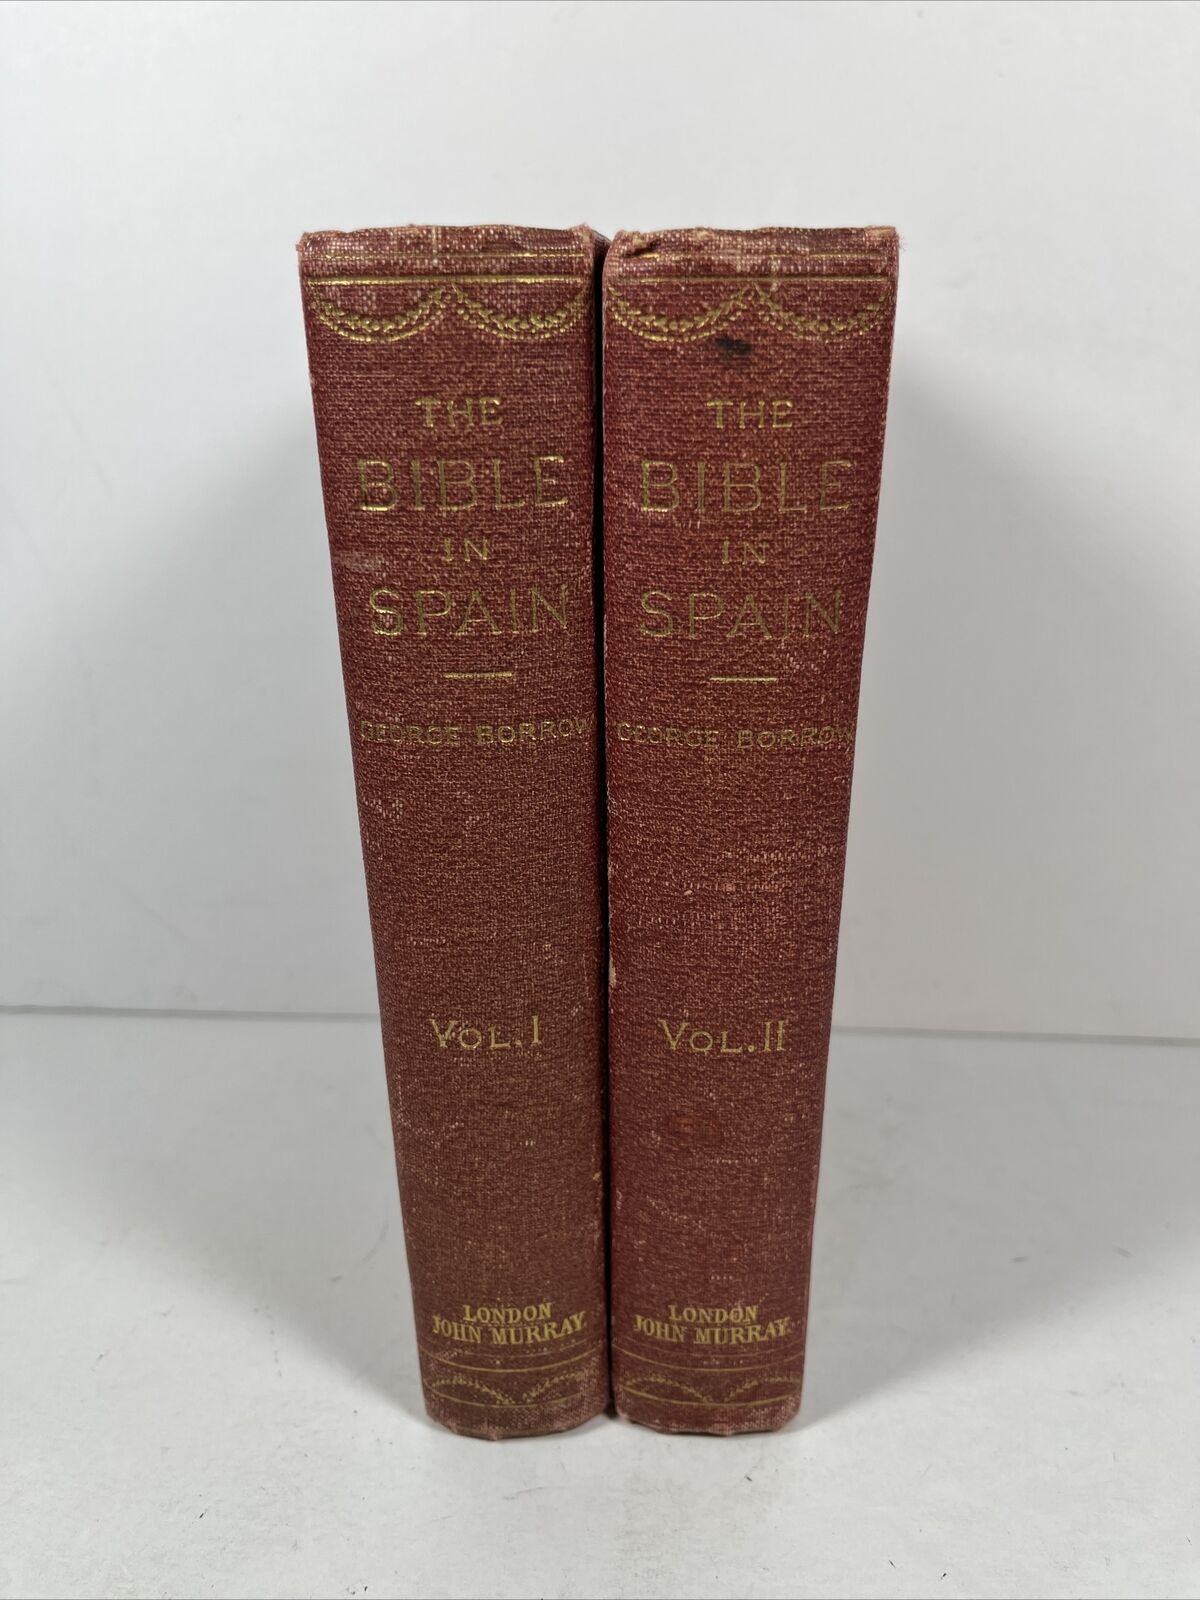 The Bible in Spain by George Borrow Vol 1 & 2 - Hardcover, 1896 London